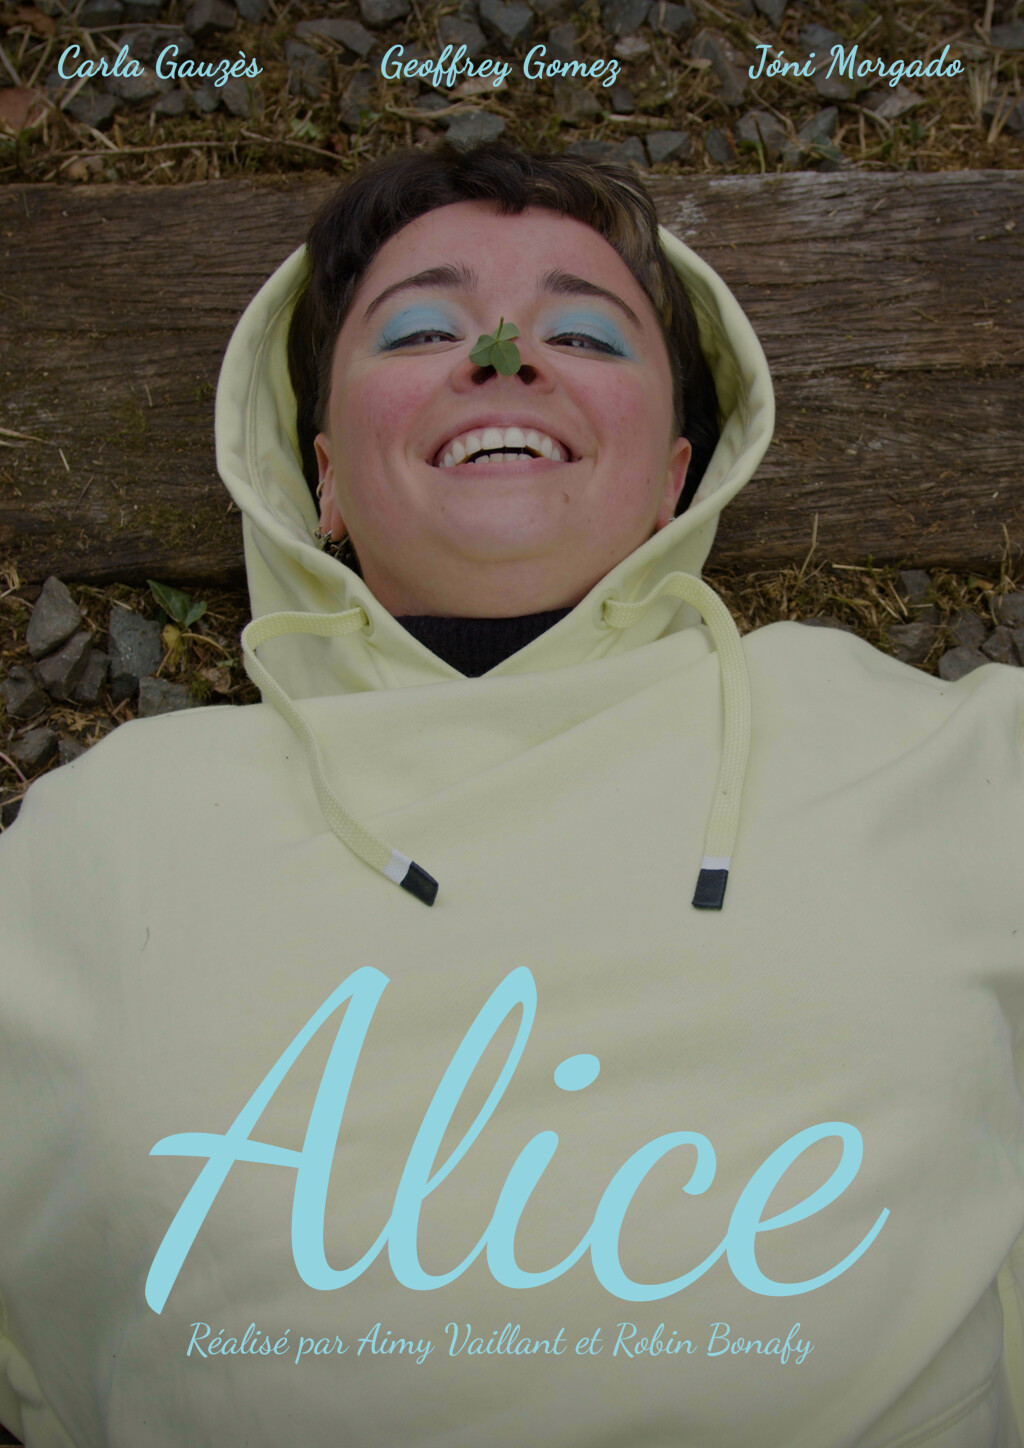 Filmposter for Alice